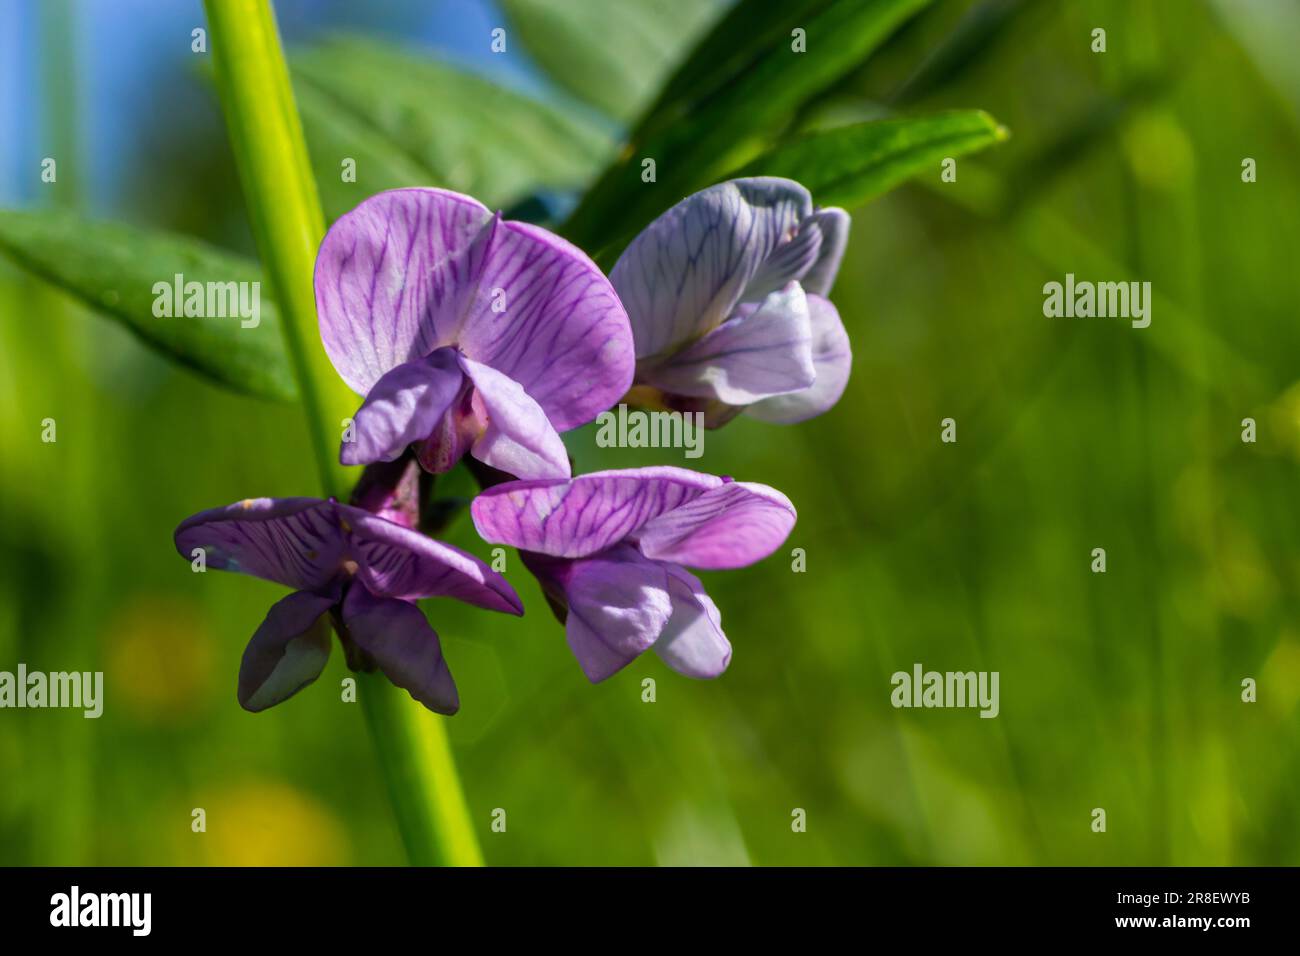 Vicia sepium or bush vetch is a plant species of the genus Vicia. Bush vetch Vicia sepium blooming on a meadow. Stock Photo